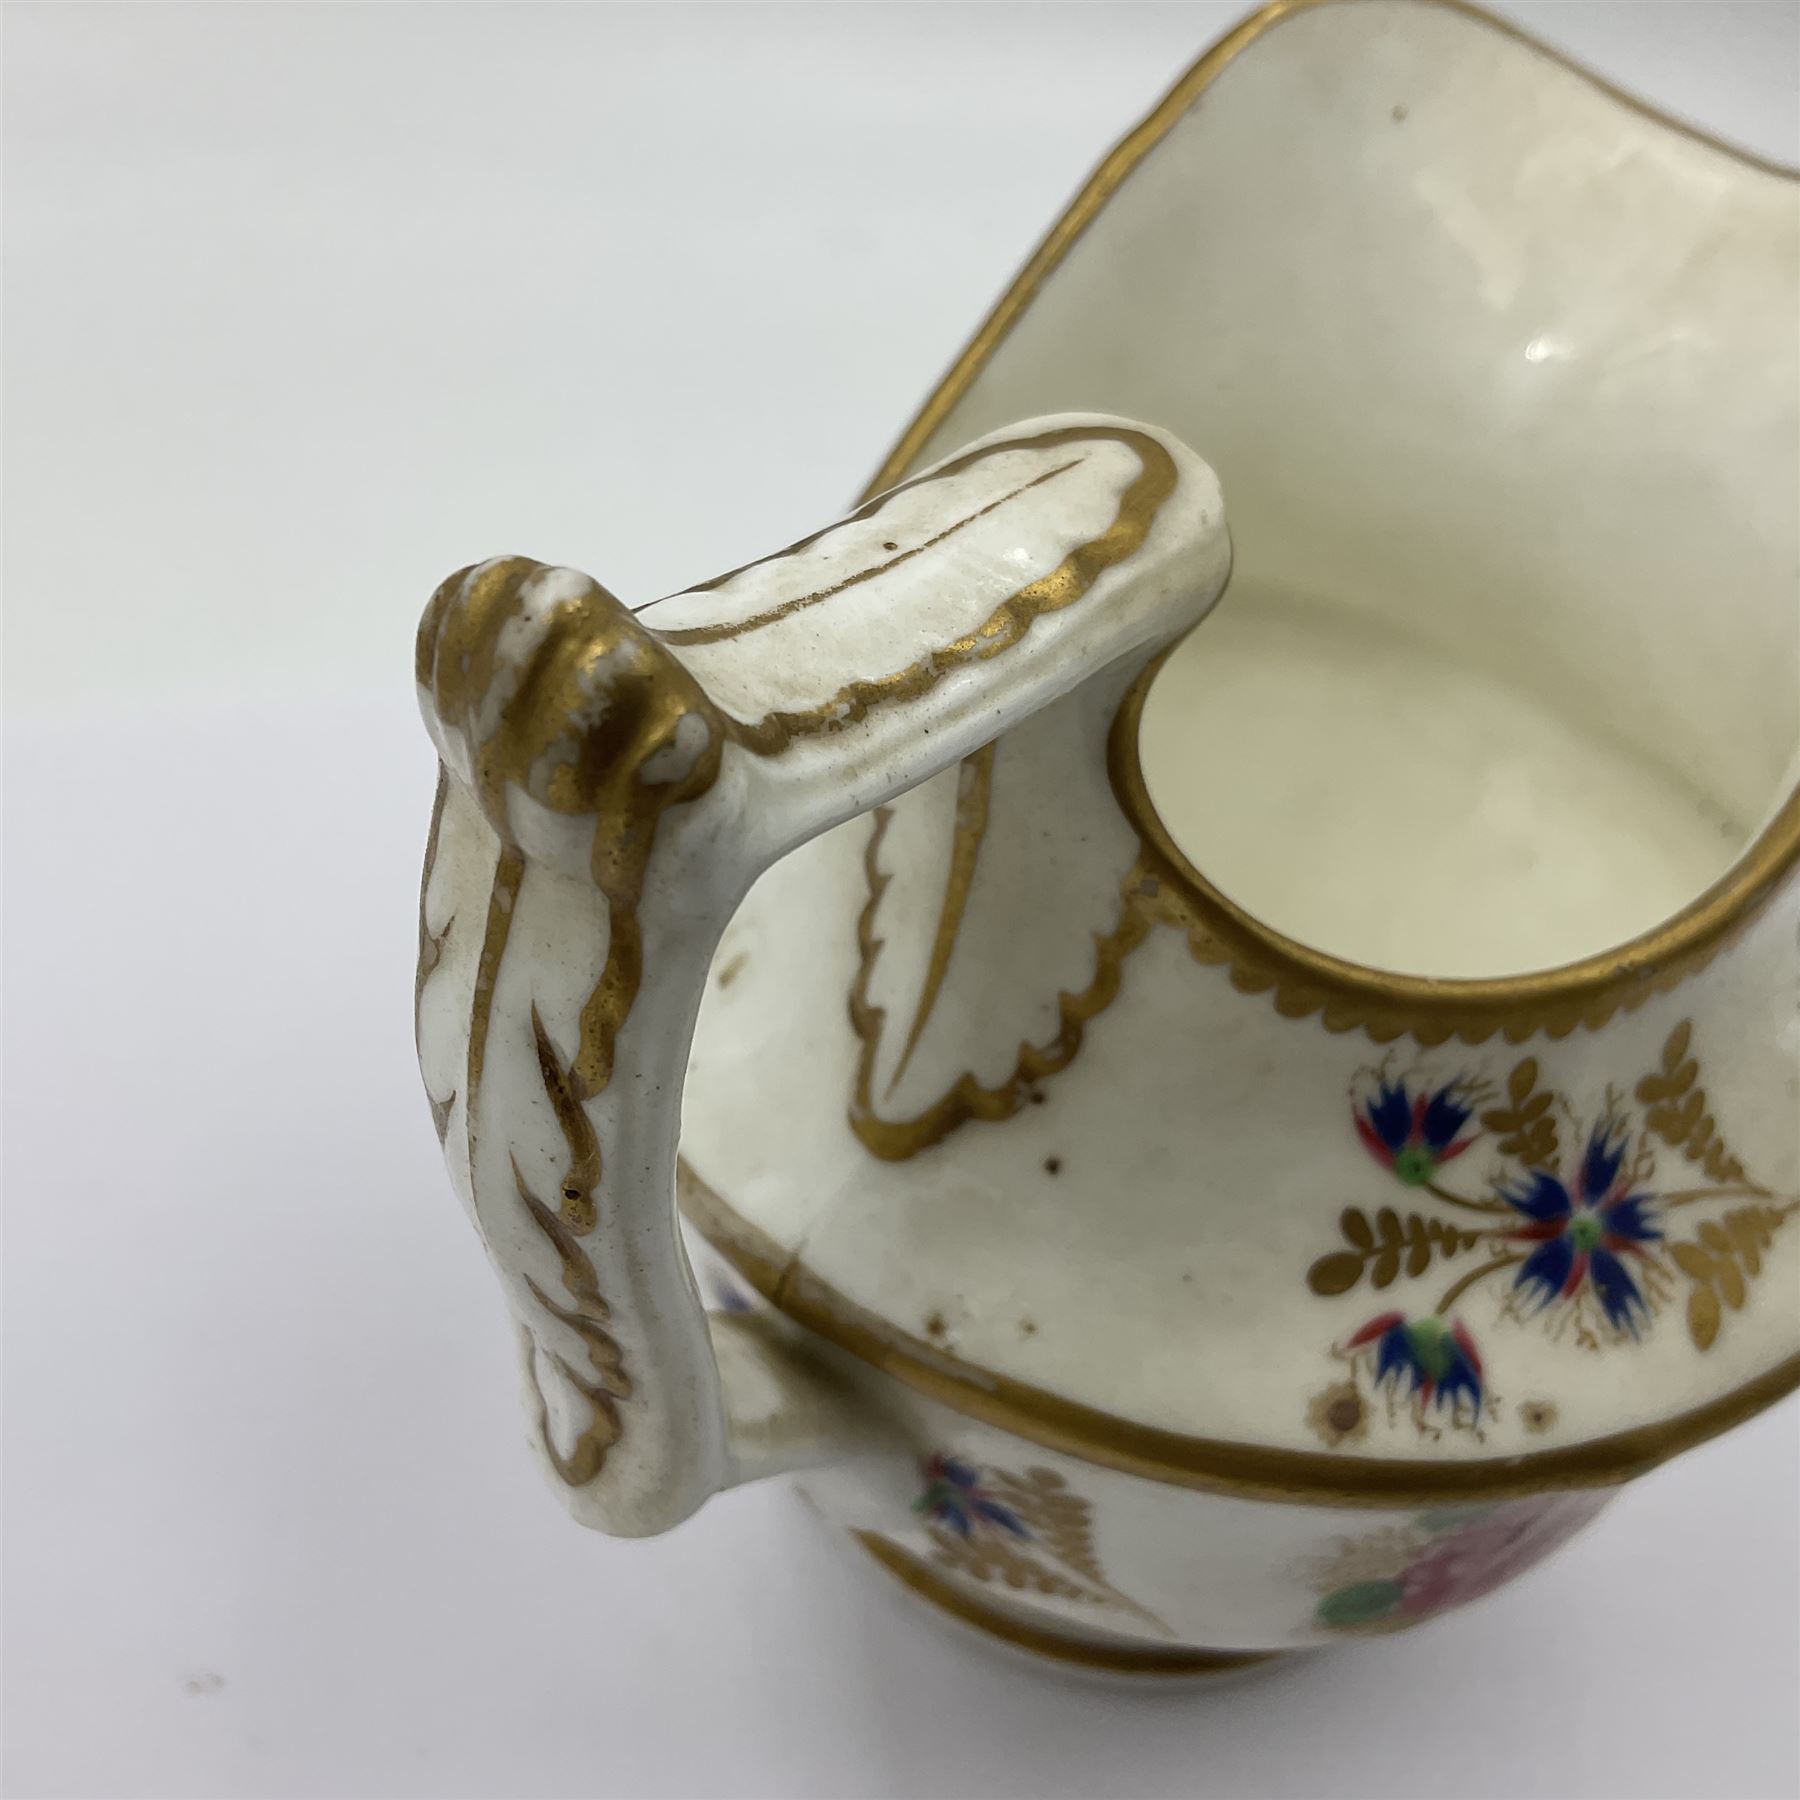 19th century Thomas Goode and Co jug - Image 14 of 22